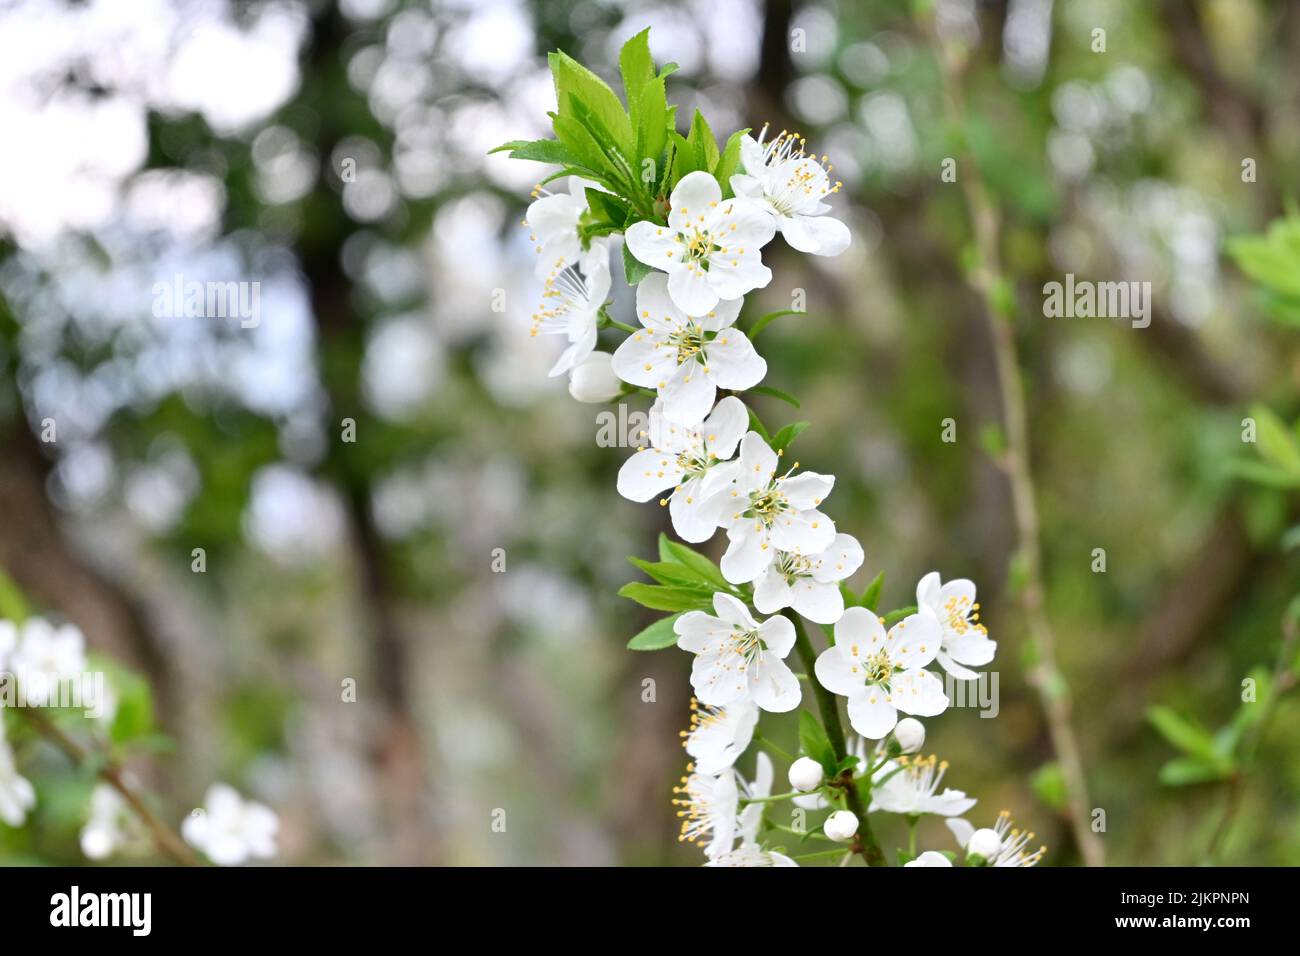 closeup the bunch yellow white apricot blossom flower soft focus natural background. Stock Photo